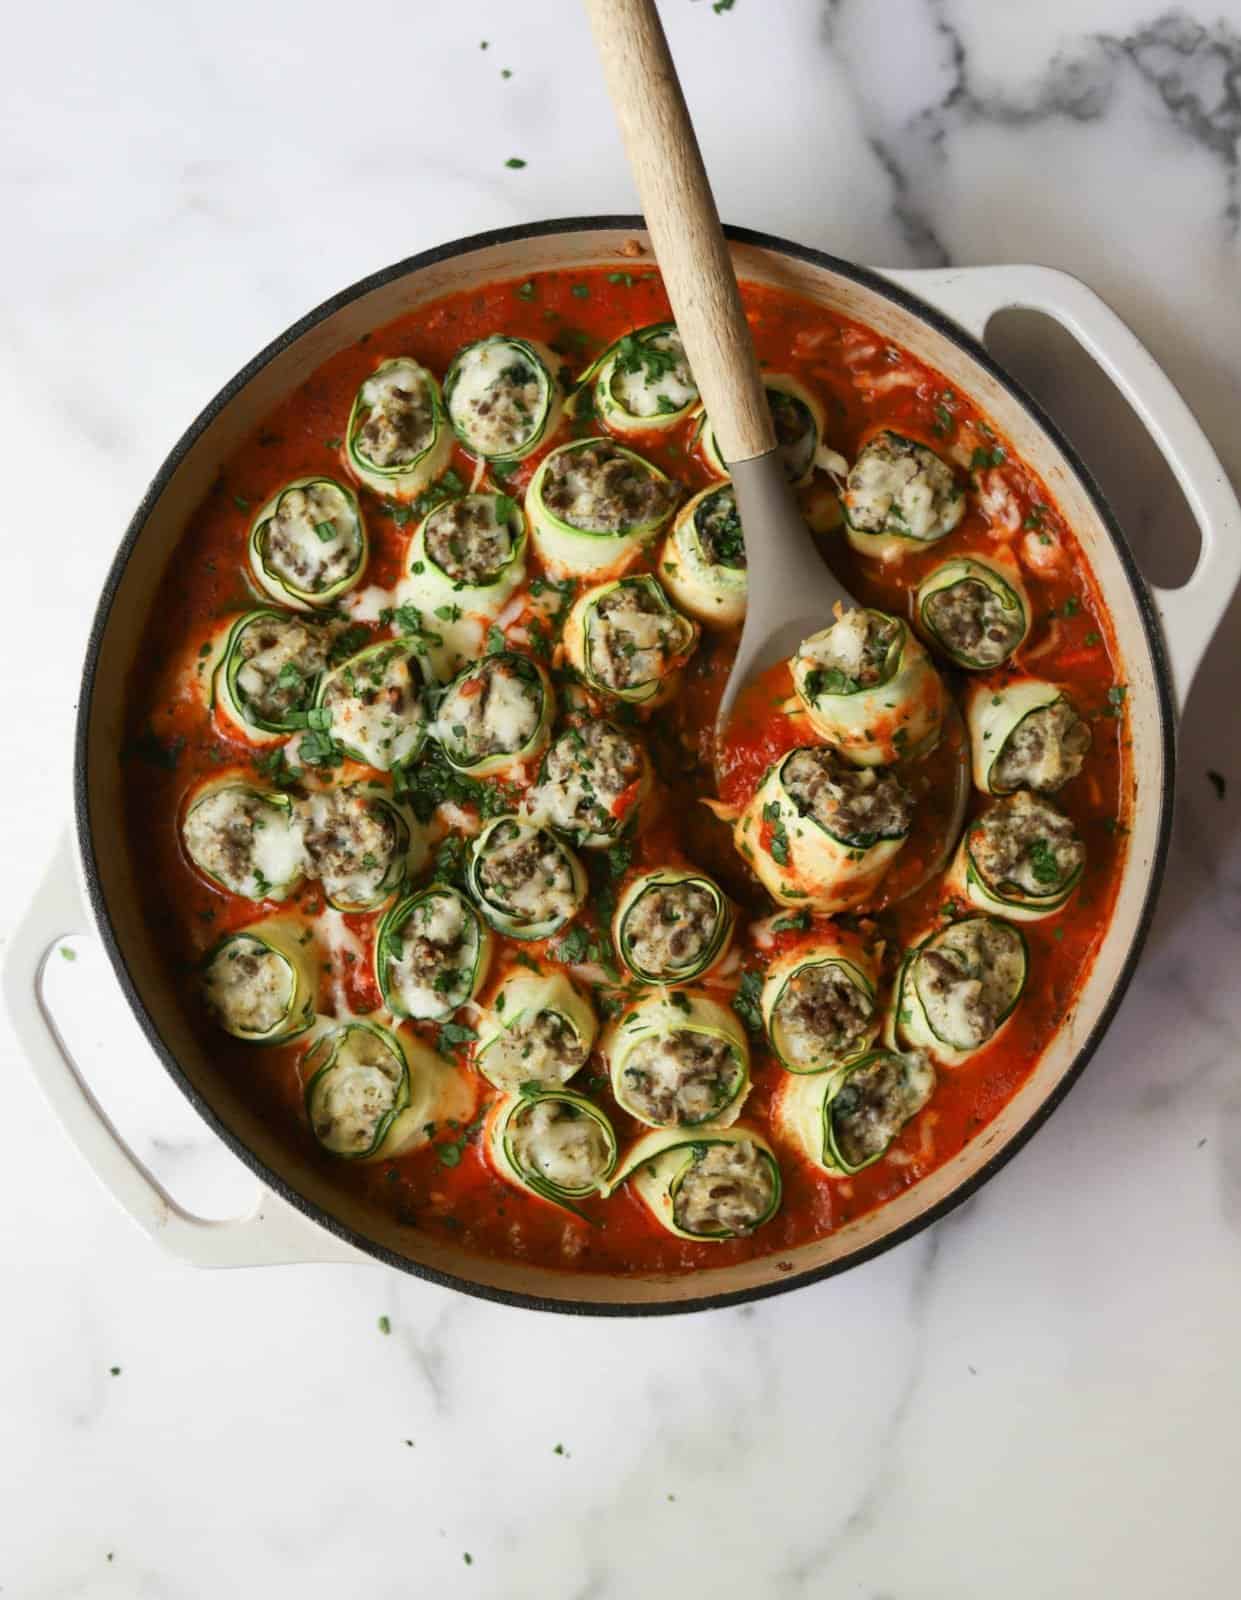 Ricotta & Beef Zucchini Roll-Ups as a featured healthy summer recipe